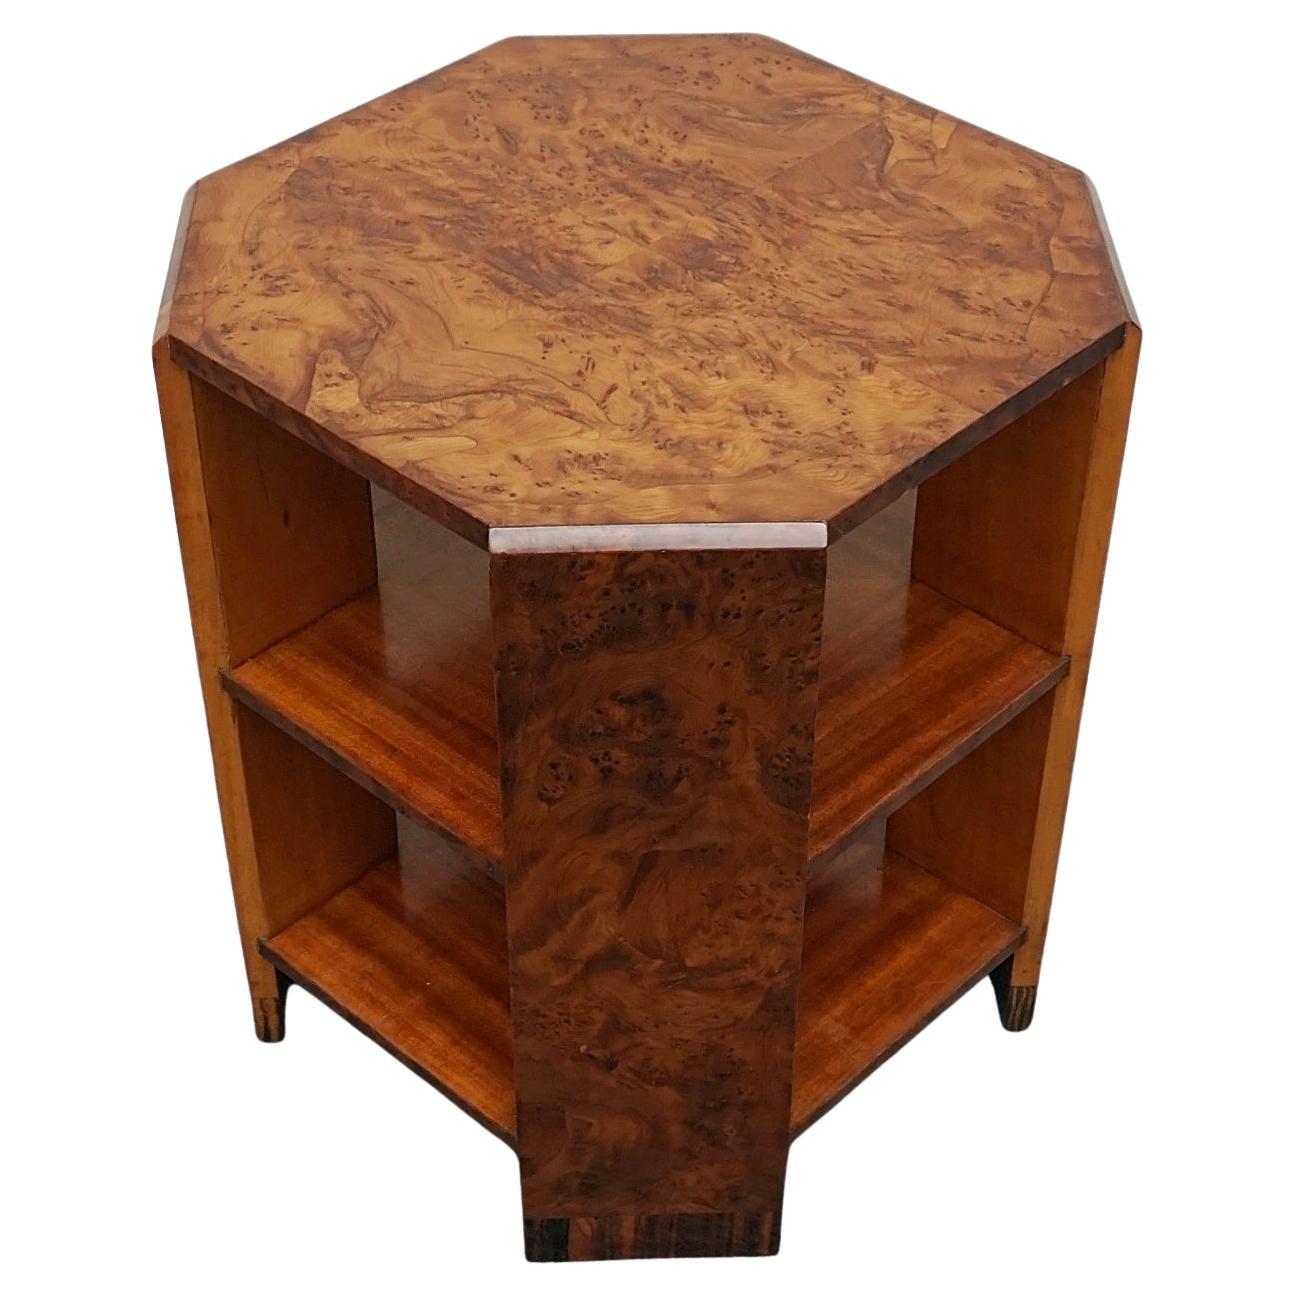 Art Deco Yew Wood Side Table by Waring & Gillow Ltd, circa 1935